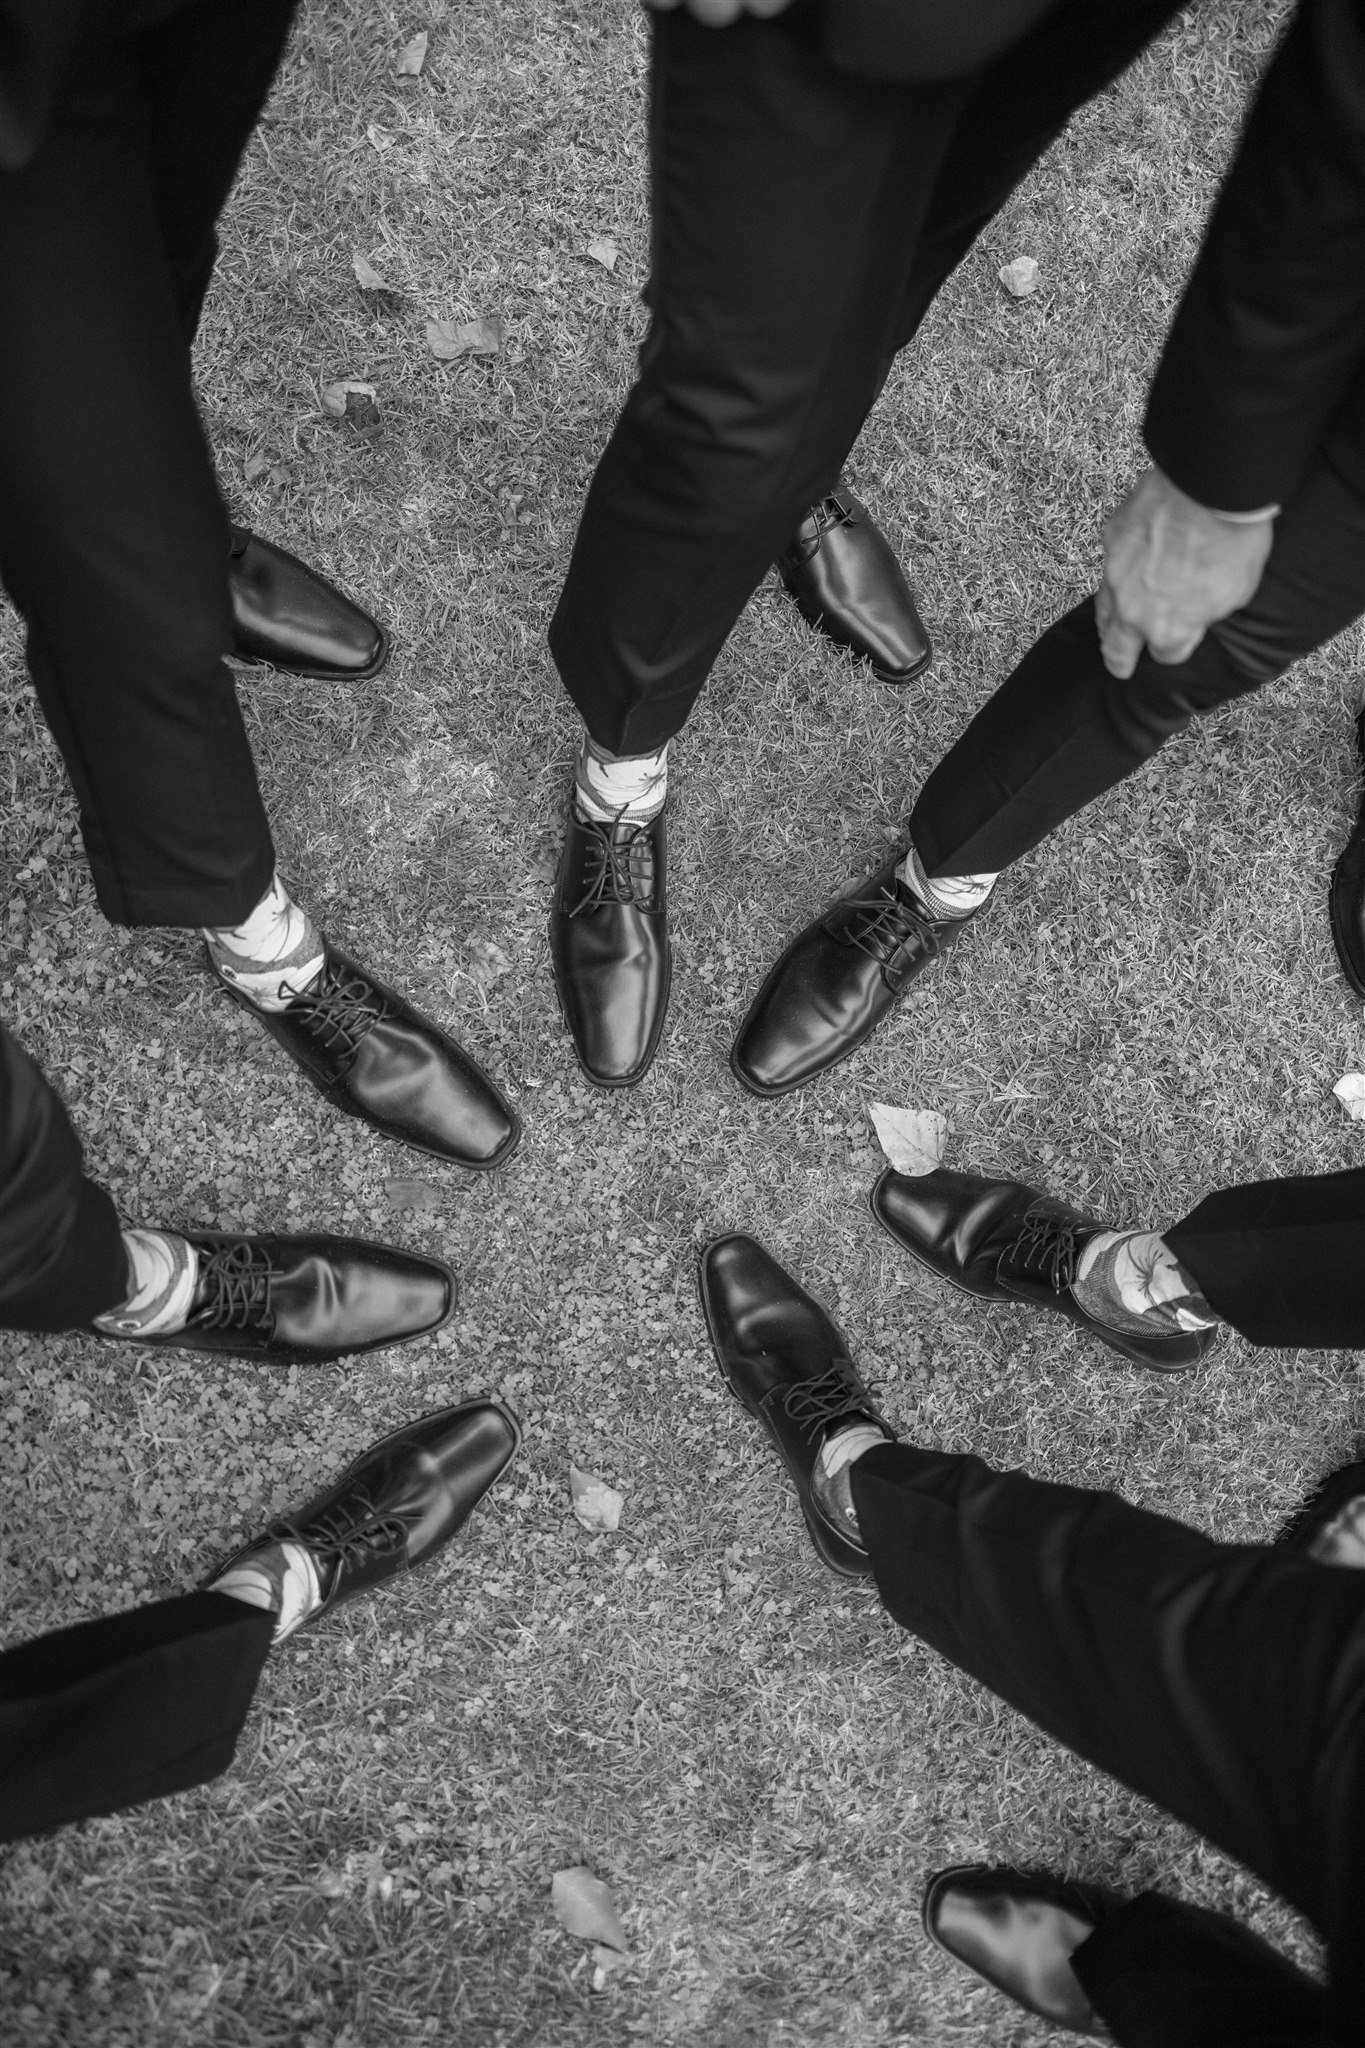 www.santabarbarawedding.com | Events by Fran | Wonder Tribe | Santa Barbara Courthouse | Groom and Groomsmen Shoes in a Circle